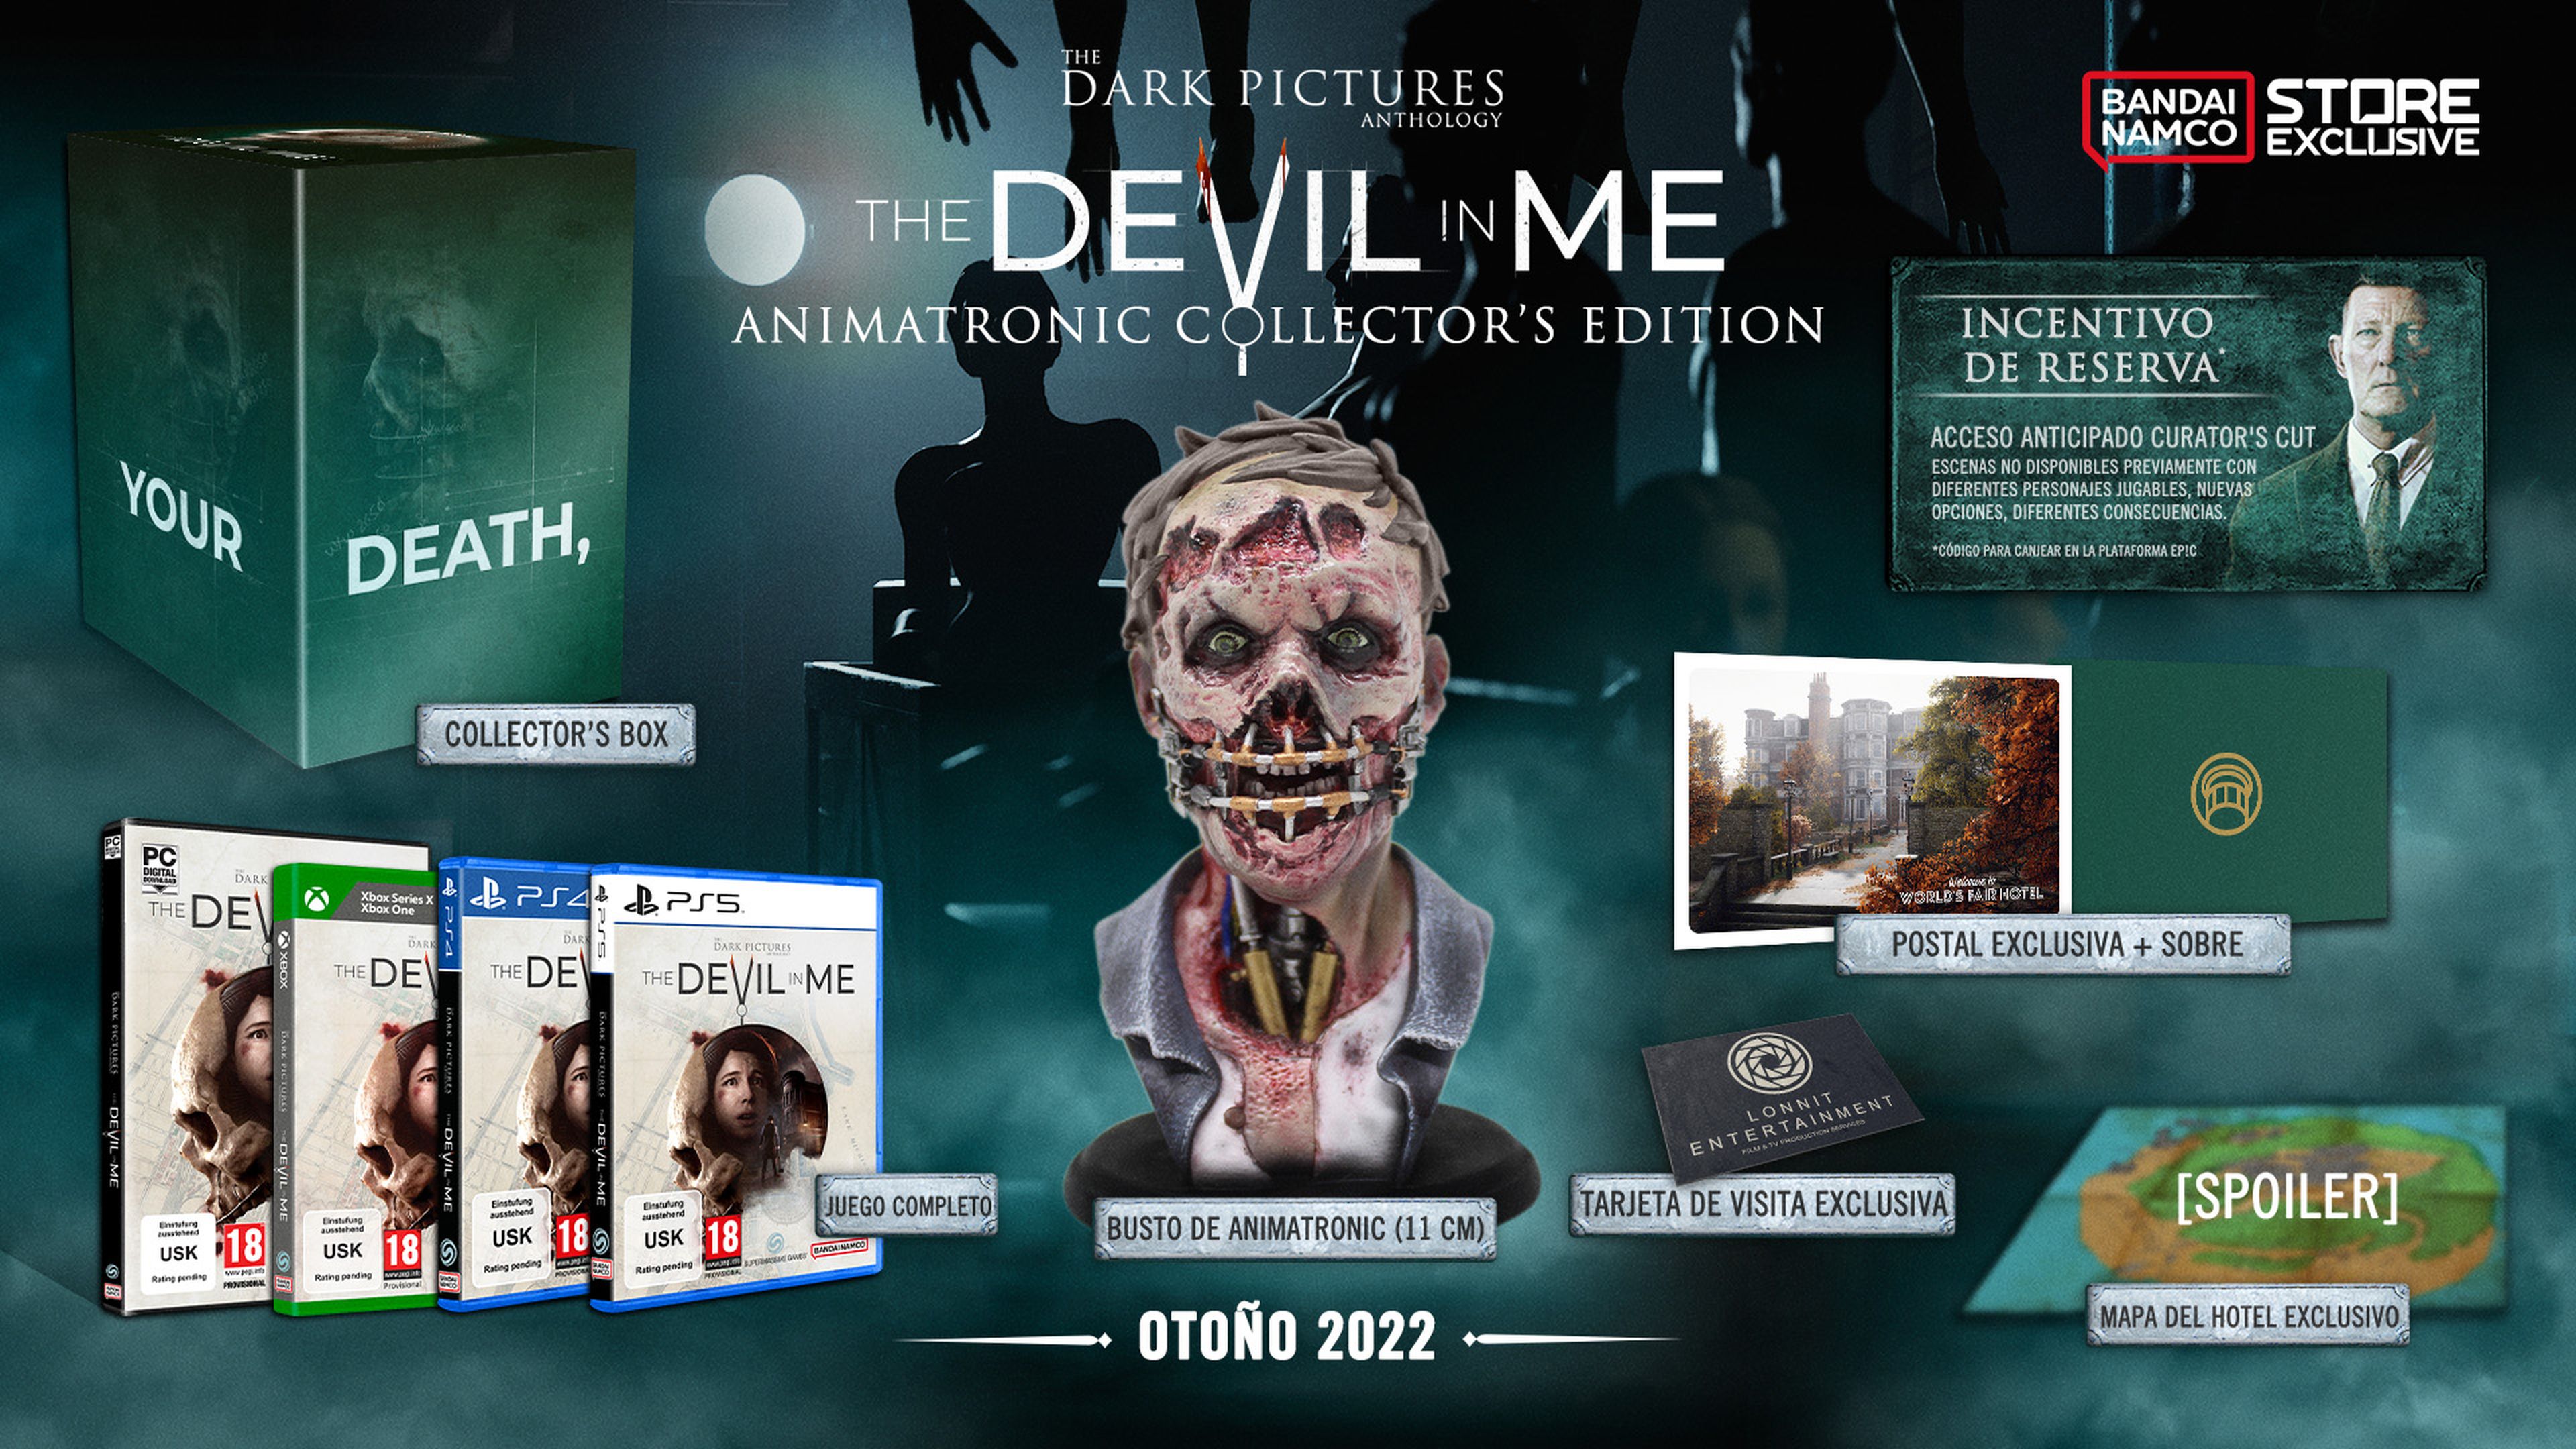 The Dark Pictures Anthology The Devil in Me - Animatronic Collector's Edition